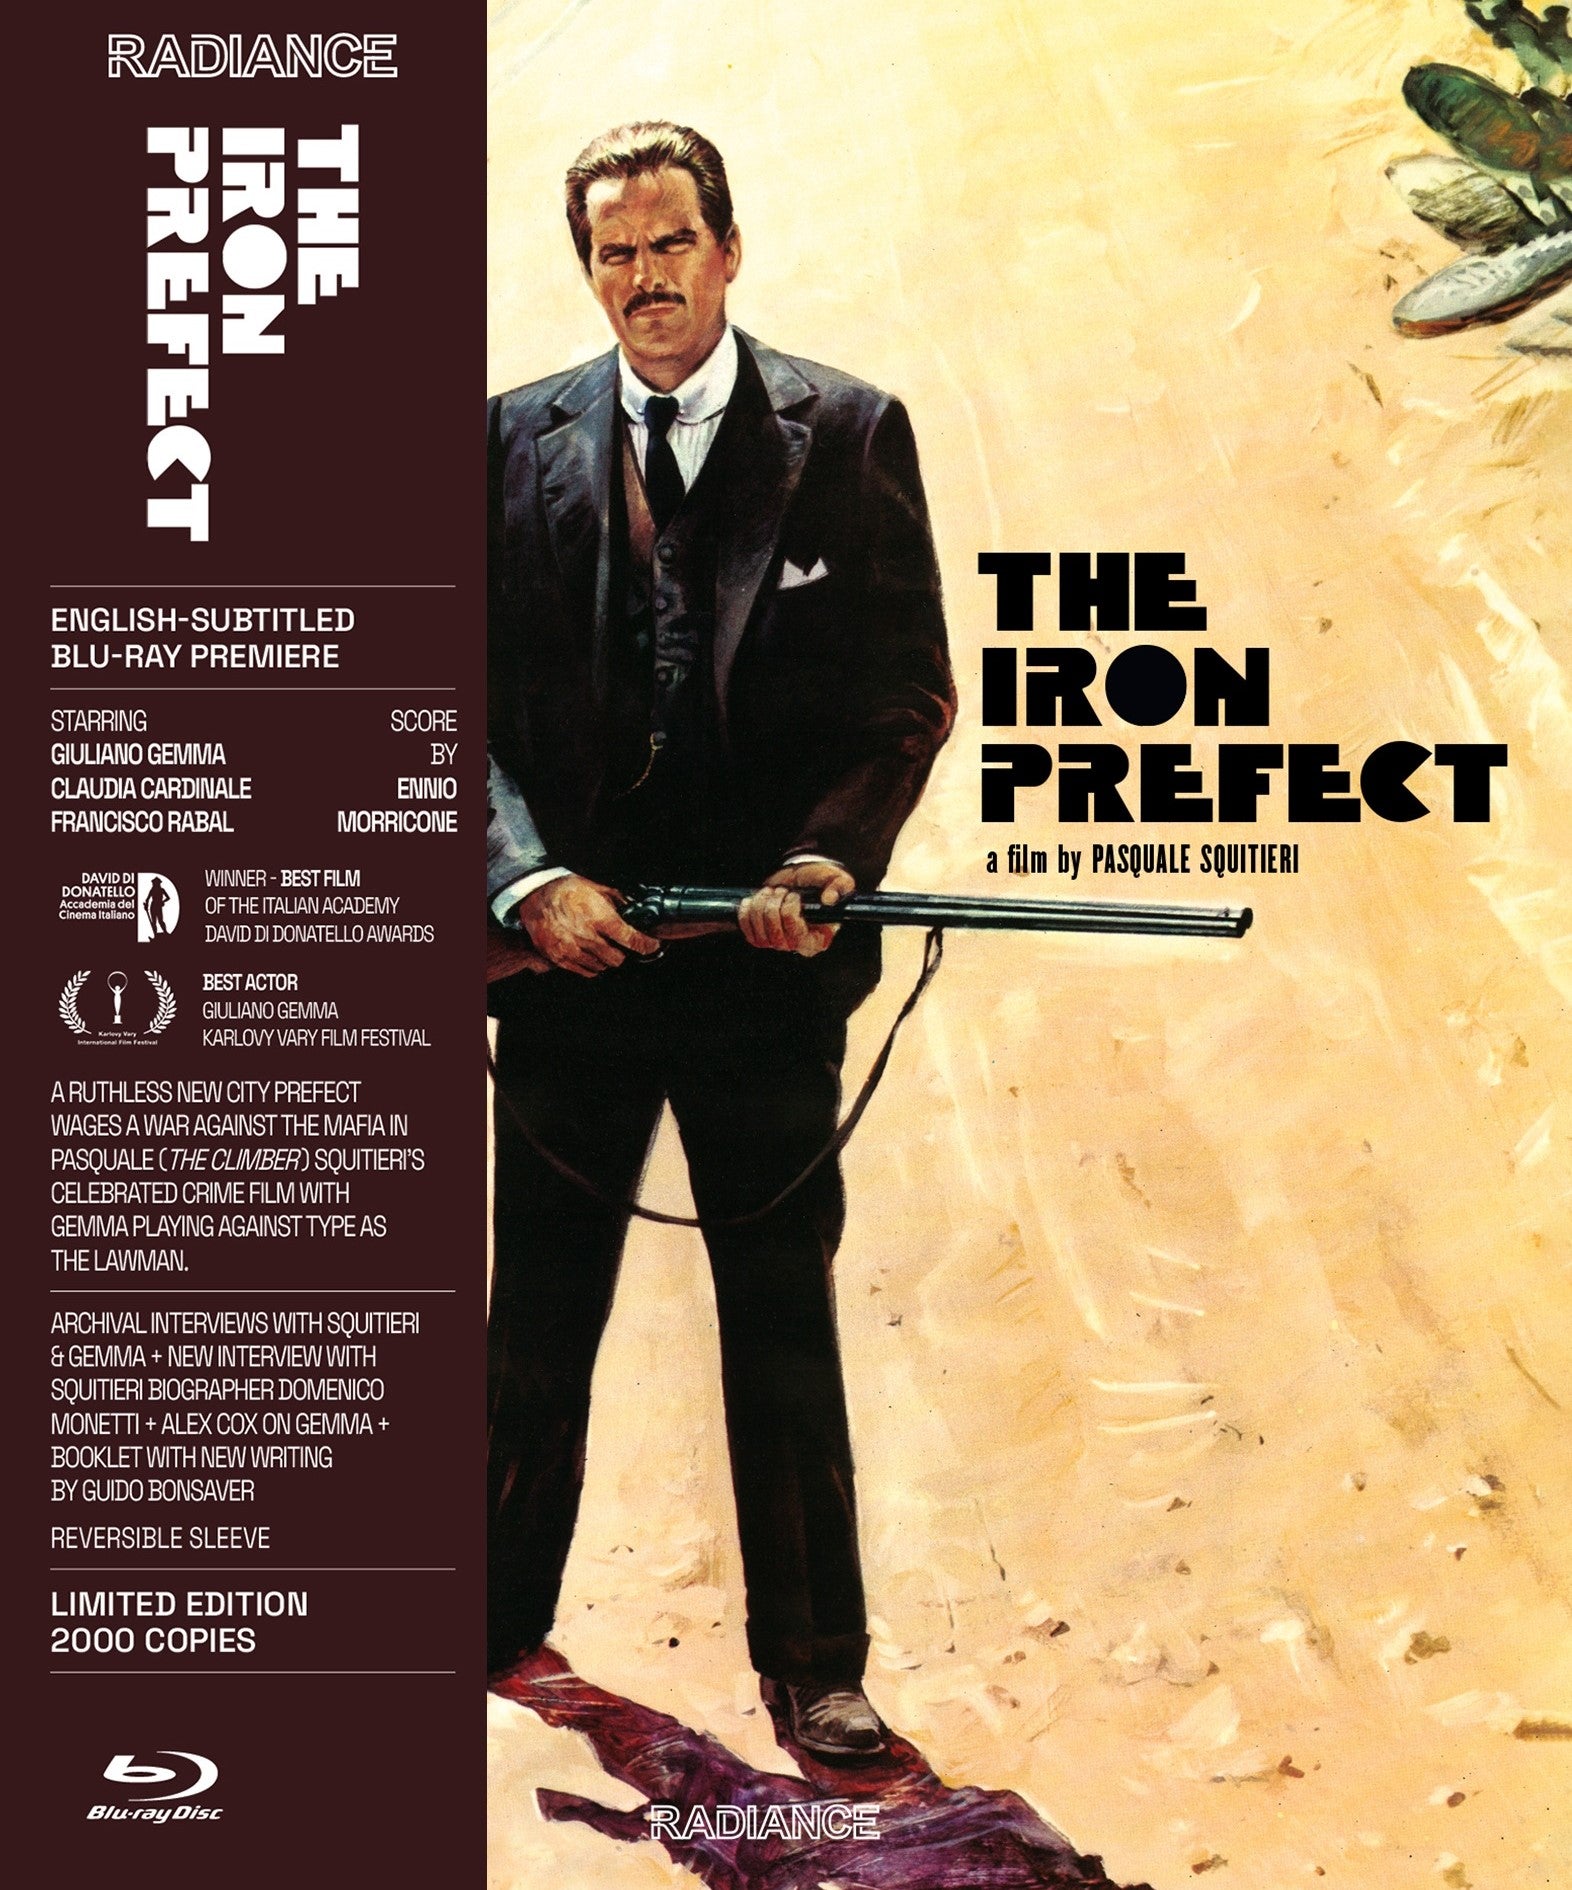 THE IRON PREFECT (LIMITED EDITION) BLU-RAY